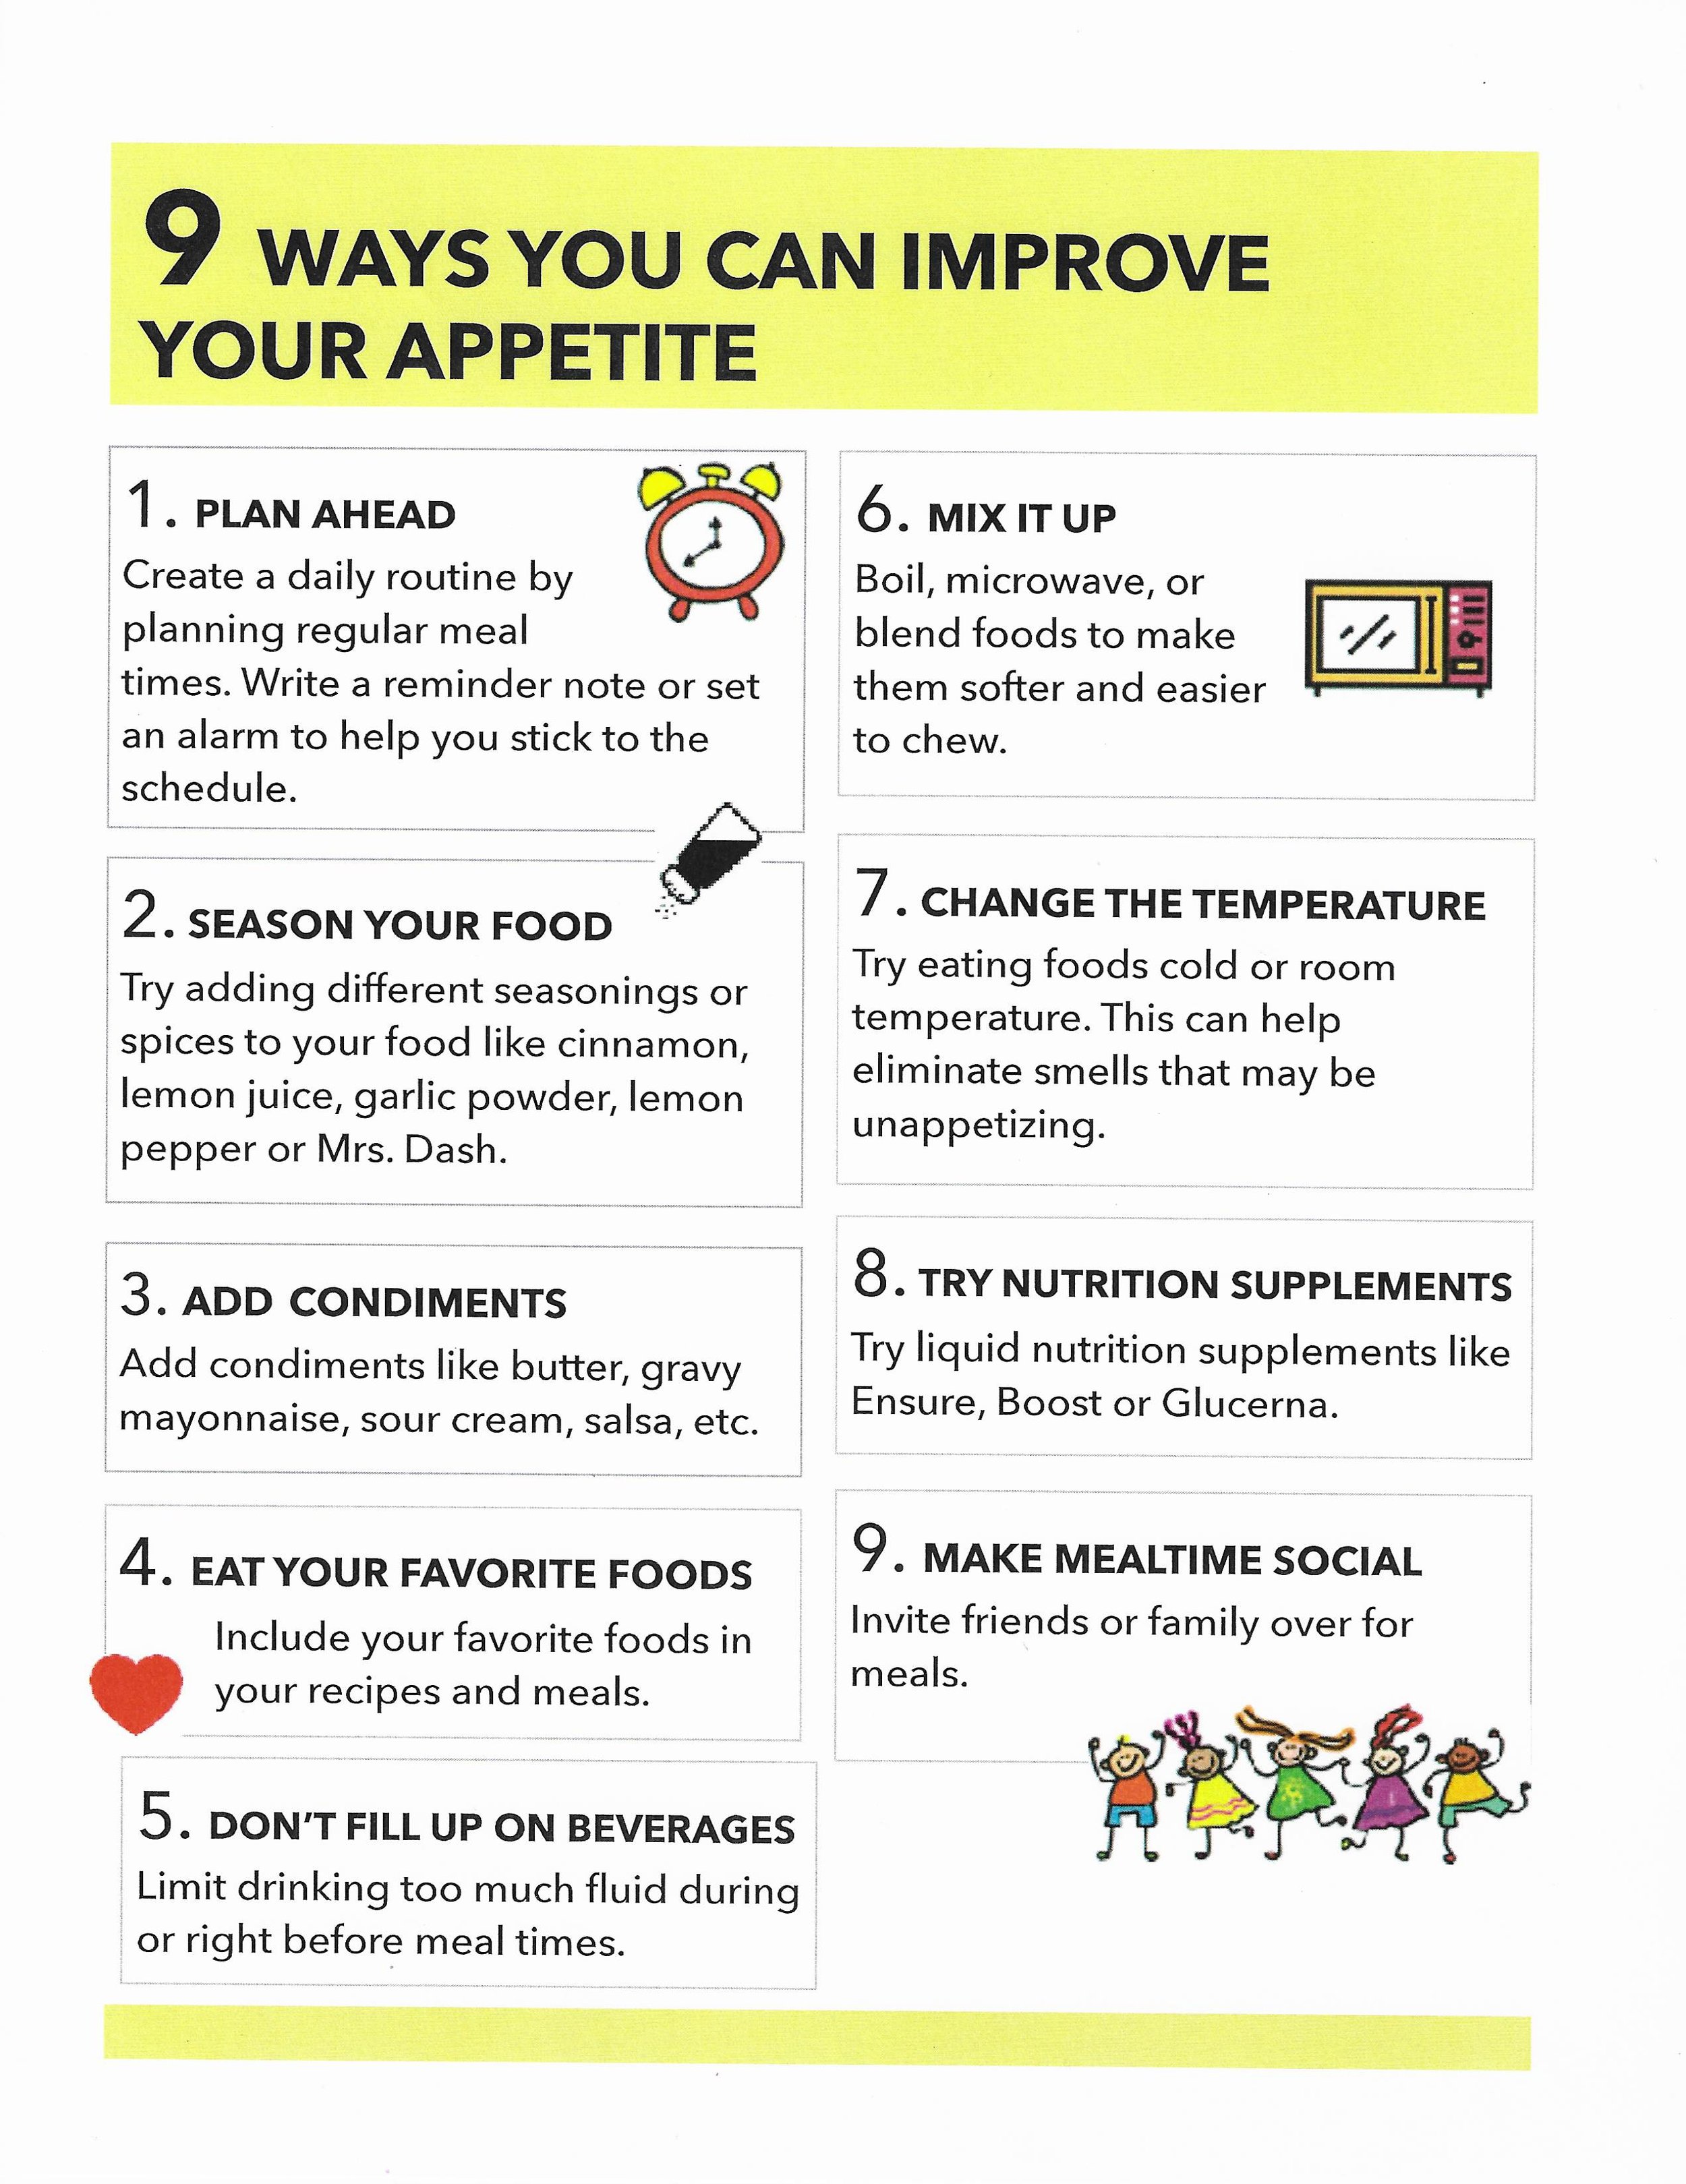 9 ways to improve your appetite.jpg